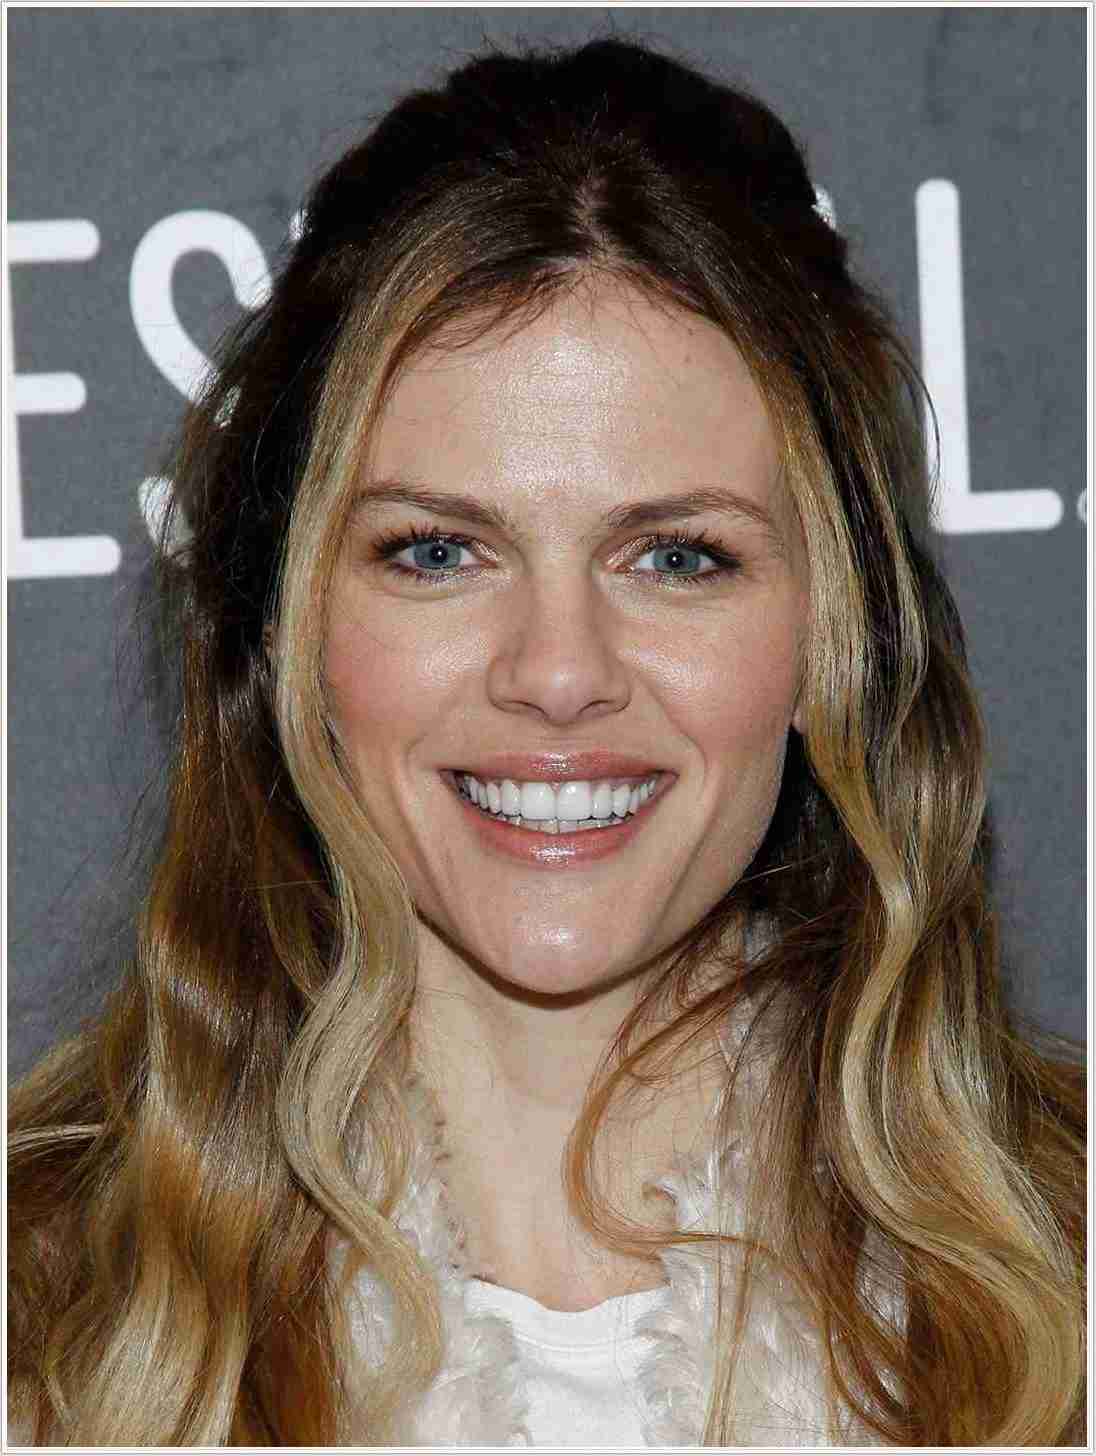 Brooklyn Decker - Bio, Facts, Family Life of Actress